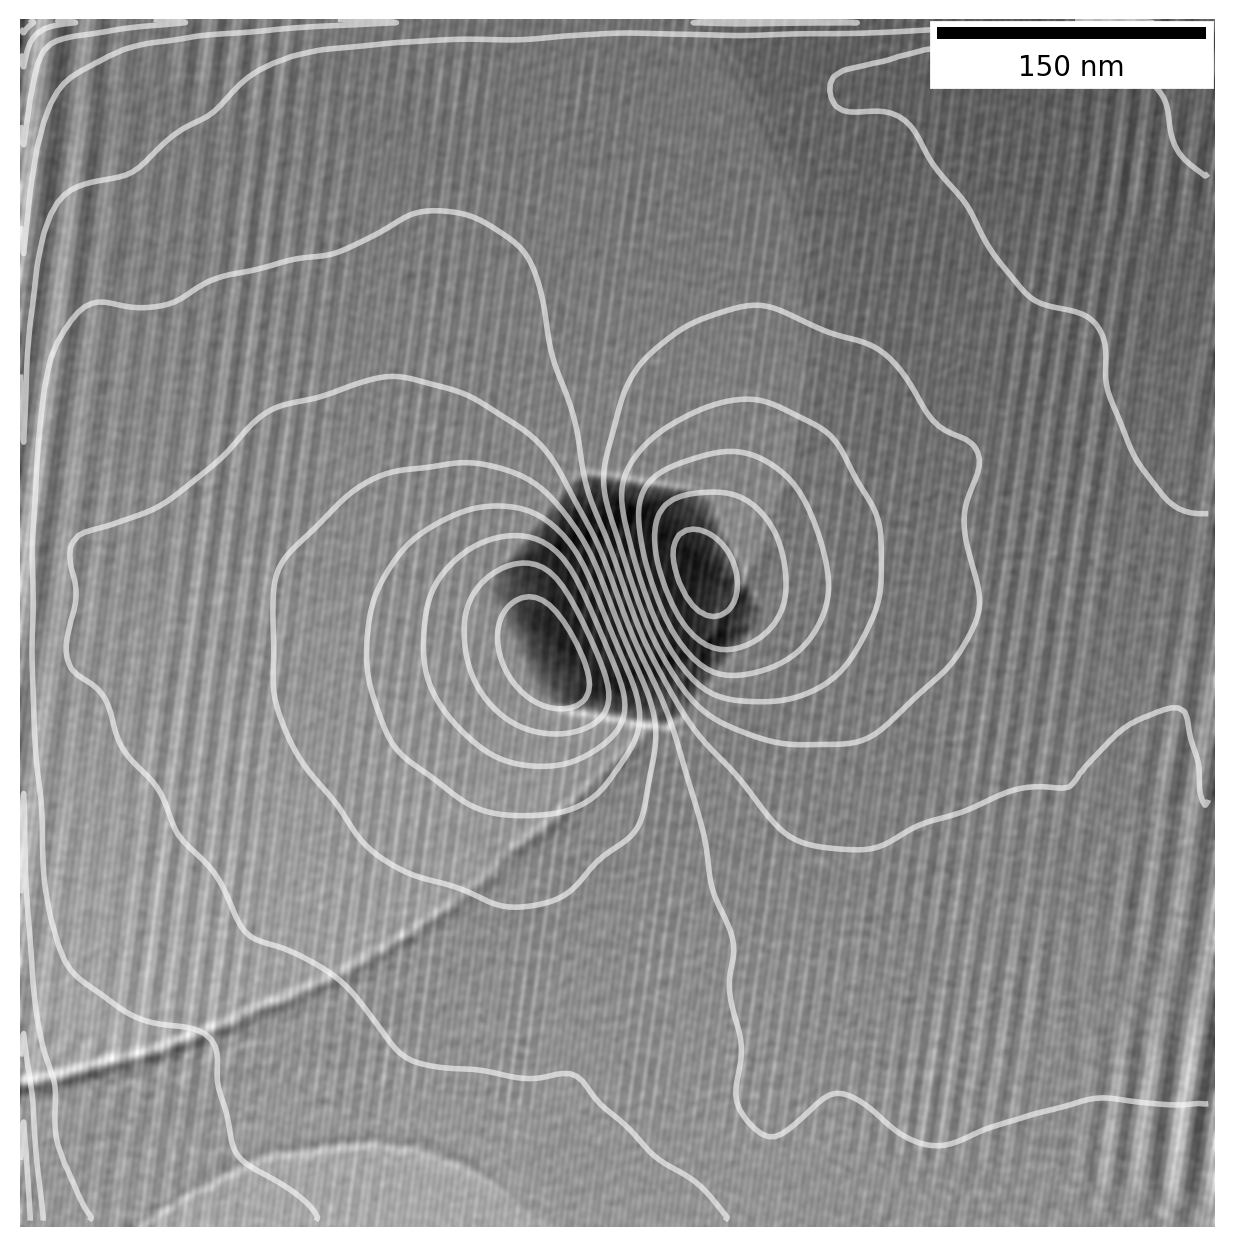 magnetic field lines around magnetite nanoparticle